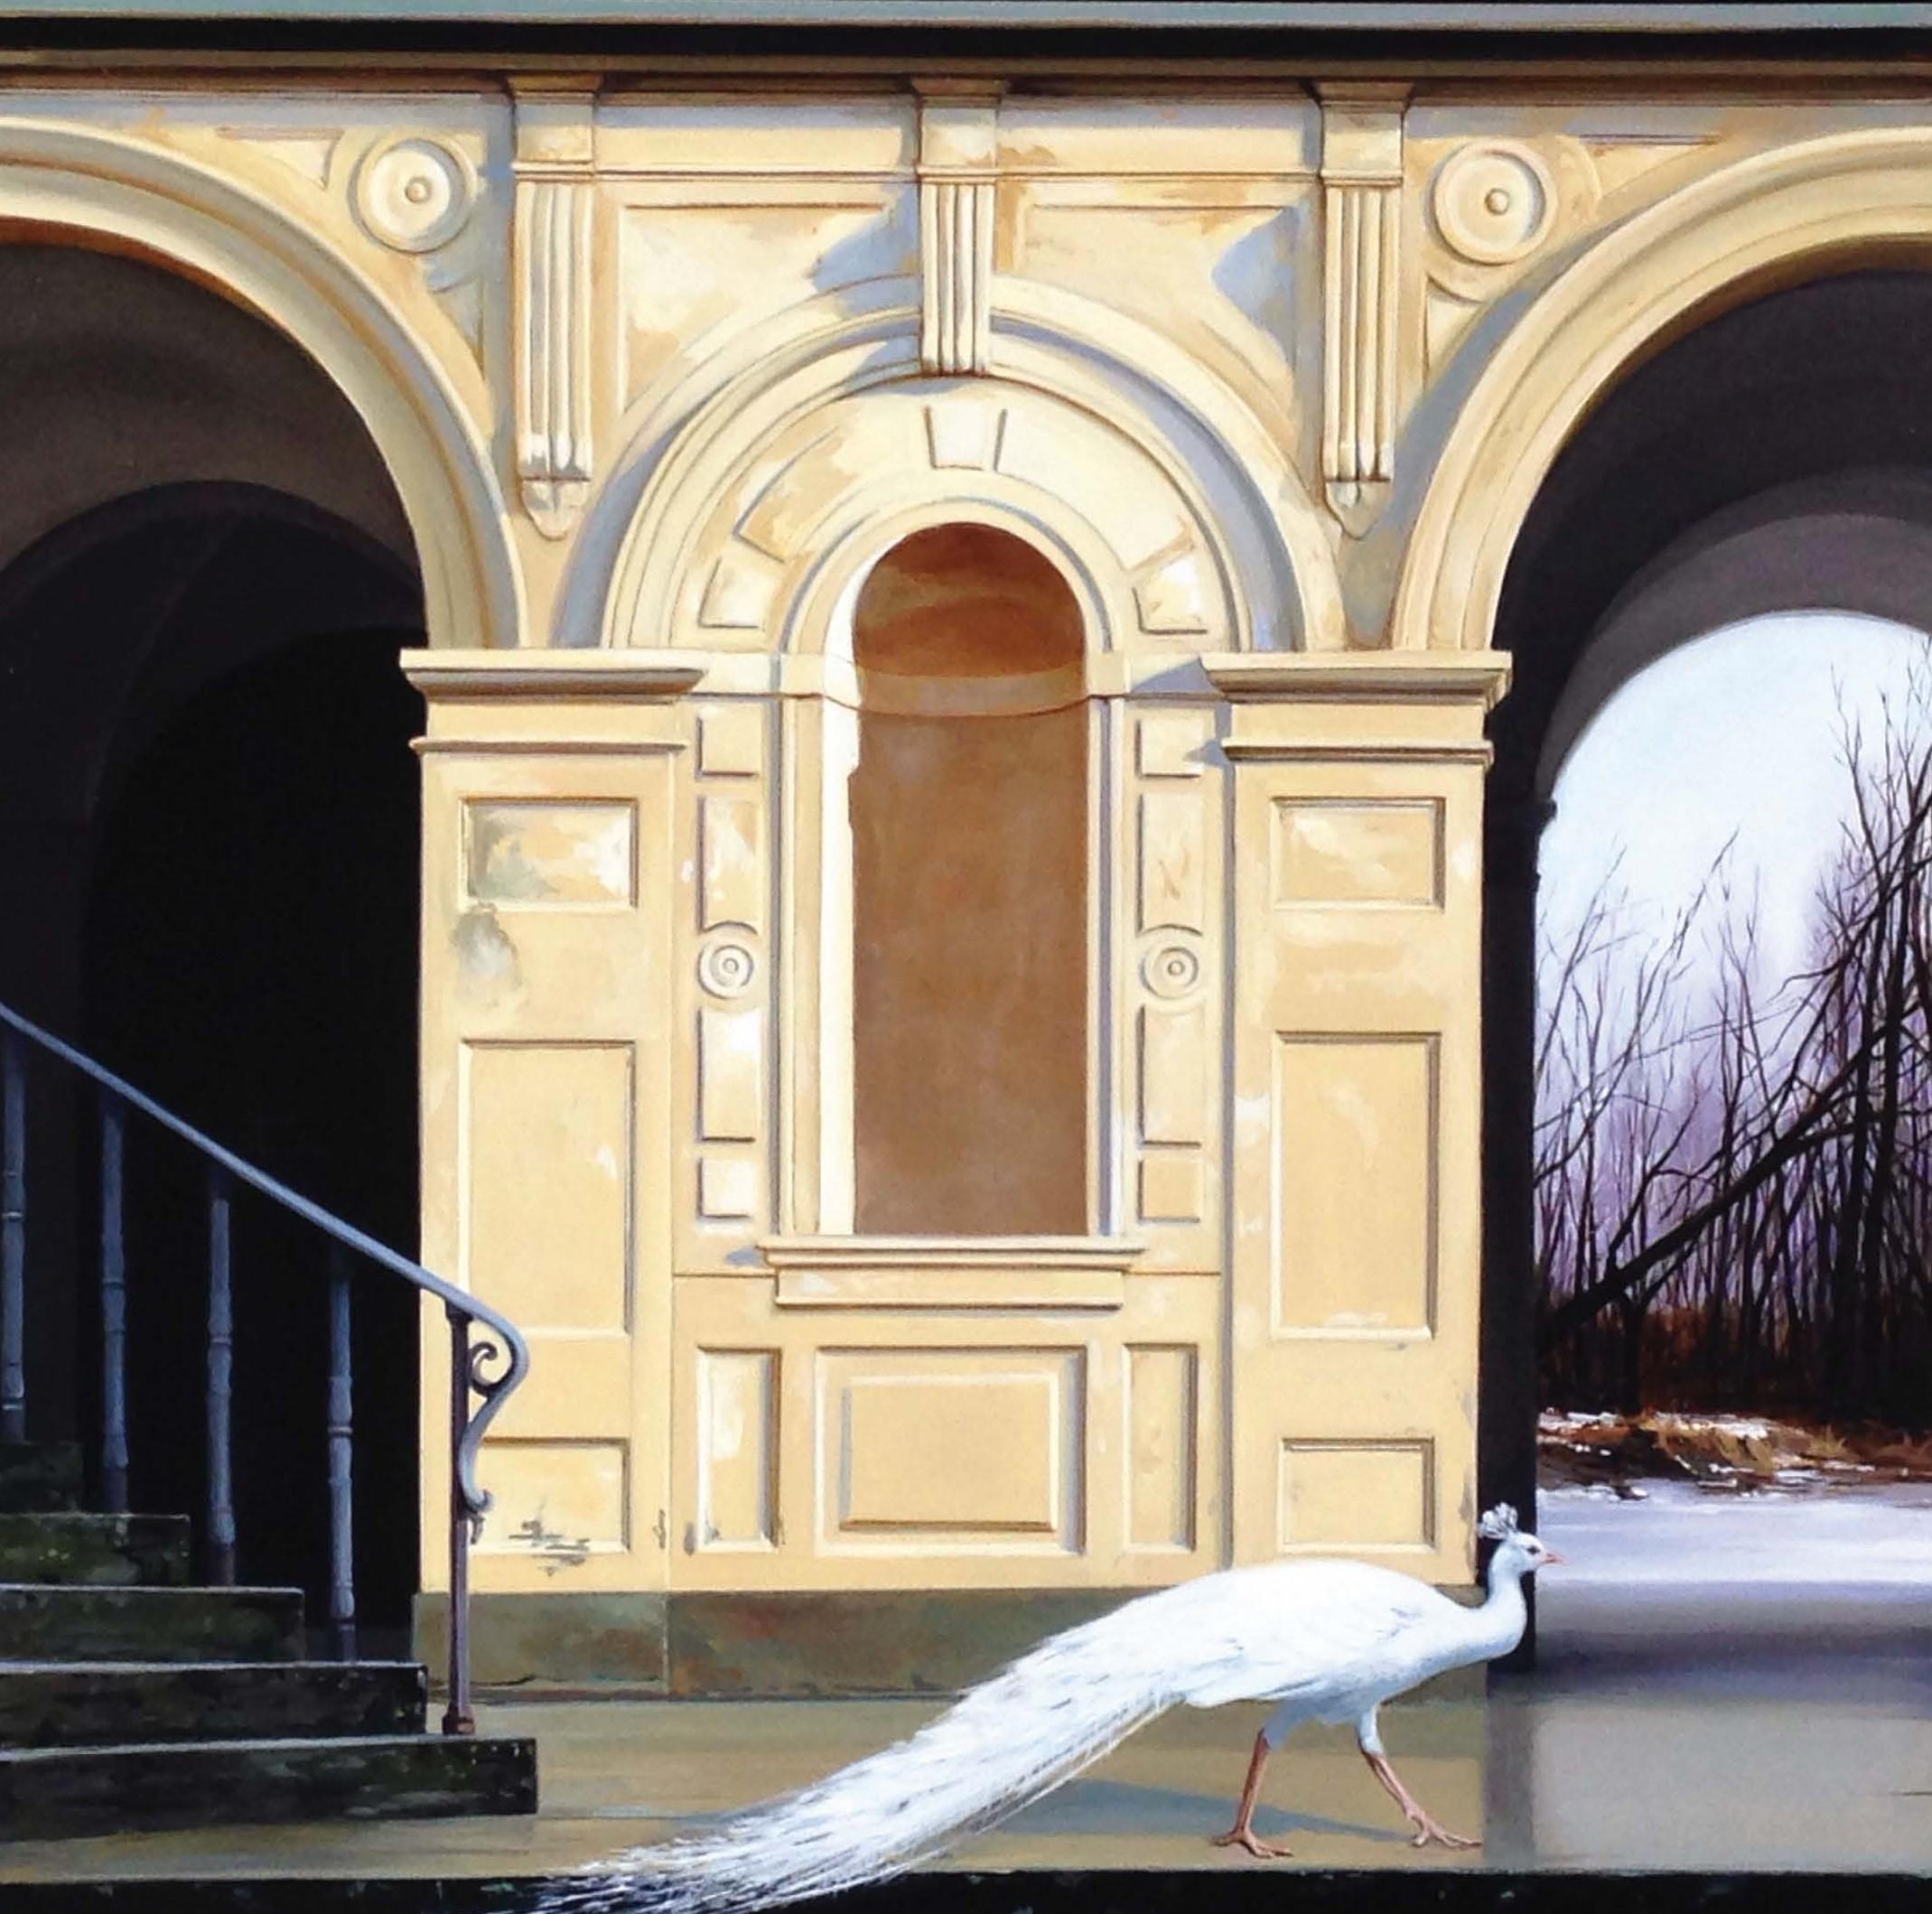 Carol Pylant Landscape Painting - Medici Winter - Classic Architecture Facade with White Peacock and Winter Scene